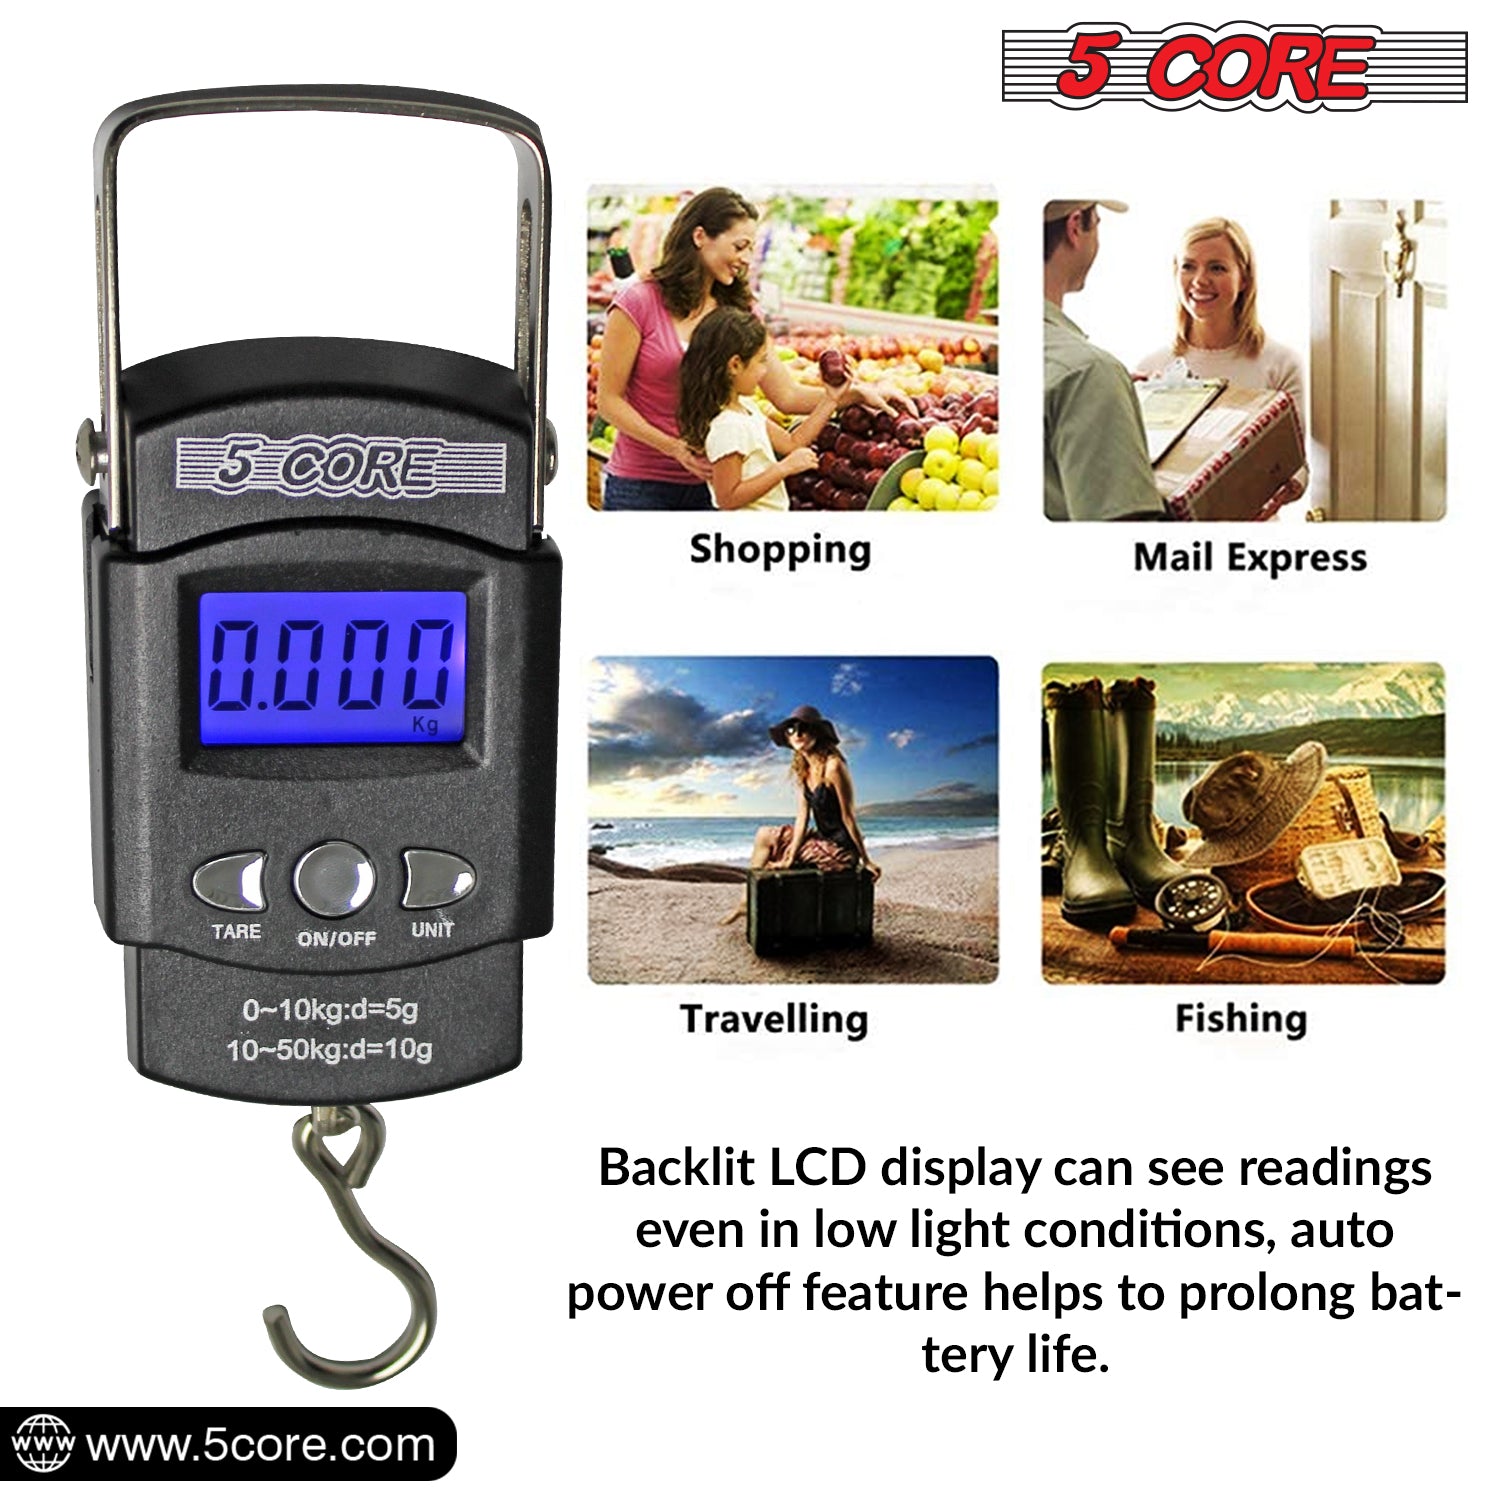 5 Core Fishing Scale 110lb/50kg Capacity •Hanging Digital Luggage Weighing Scales w Measuring Tape